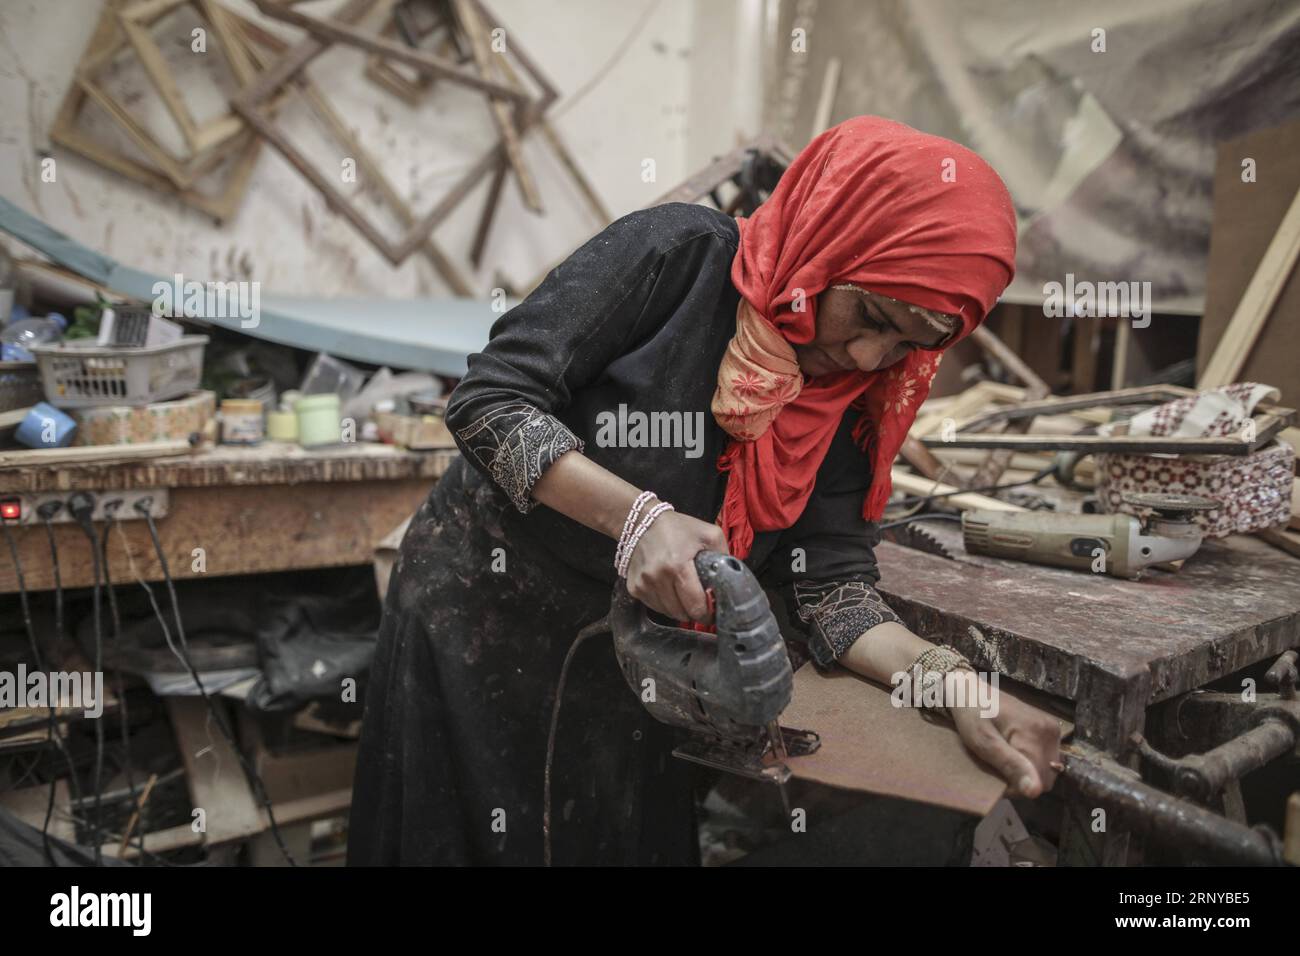 (180308) -- GAZA, Mar. 8, 2018 - Palestinian woman Amal Regaeg, 40, is seen working inside her carpentry shop, in al-Nusairat refugee camp, in the central Gaza Strip, on the International Women s Day, on Mar. 8, 2018. Regaeg has founded the shop and she started working as the first female carpenter in Gaza 10 years ago. Wissam Nassar) MIDEAST-GAZA-MARKET-WOMAN-DAY zhaoyue PUBLICATIONxNOTxINxCHN Stock Photo